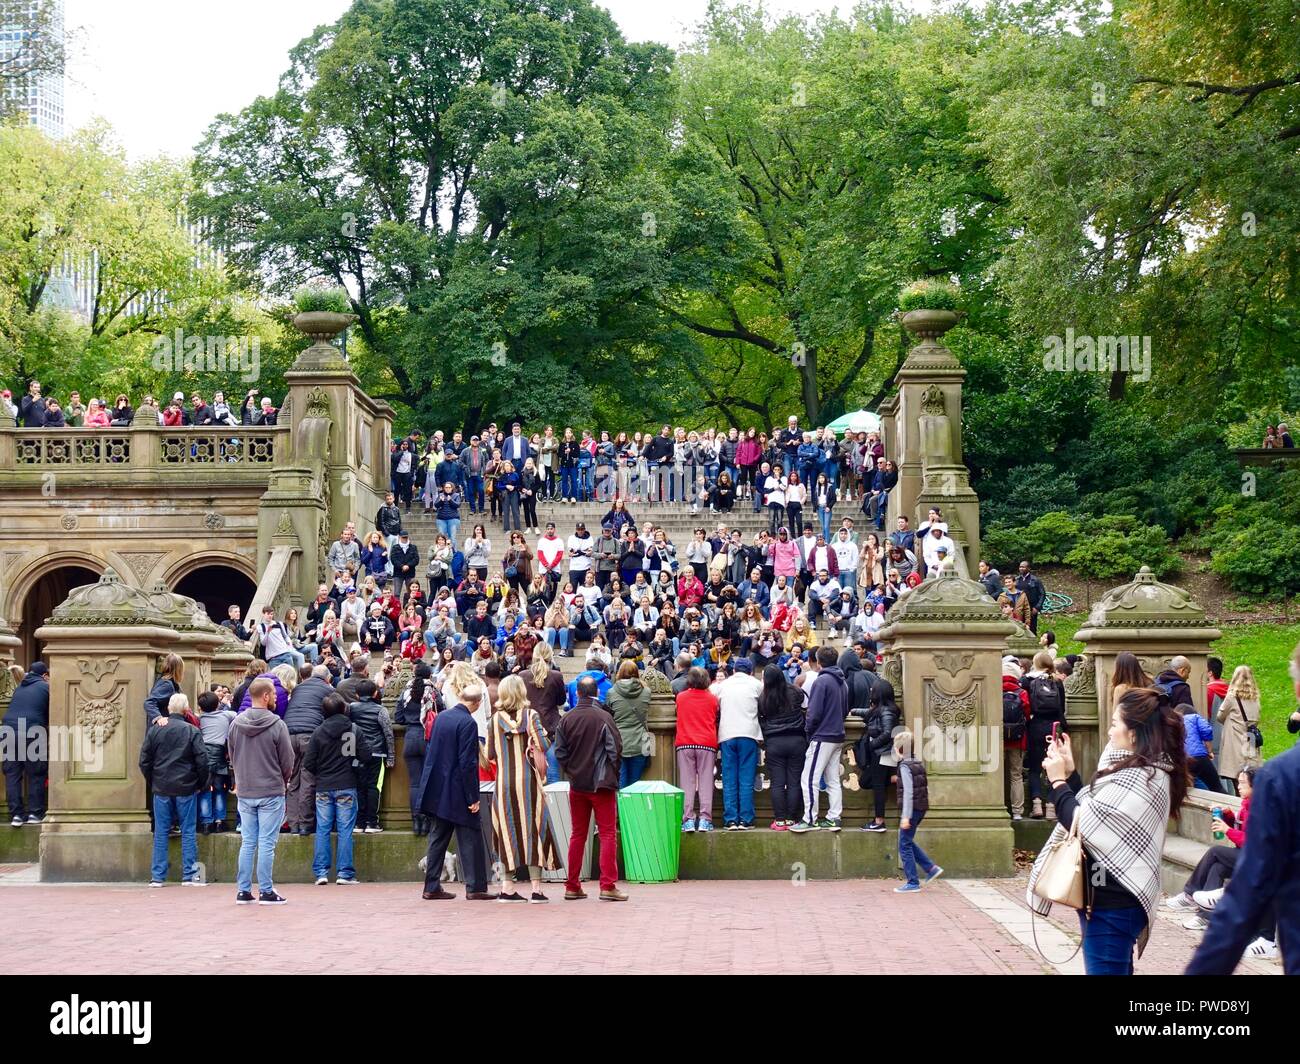 Crowd of people watching performers from steps near Belvedere Fountain in Central Park, New York, USA Stock Photo